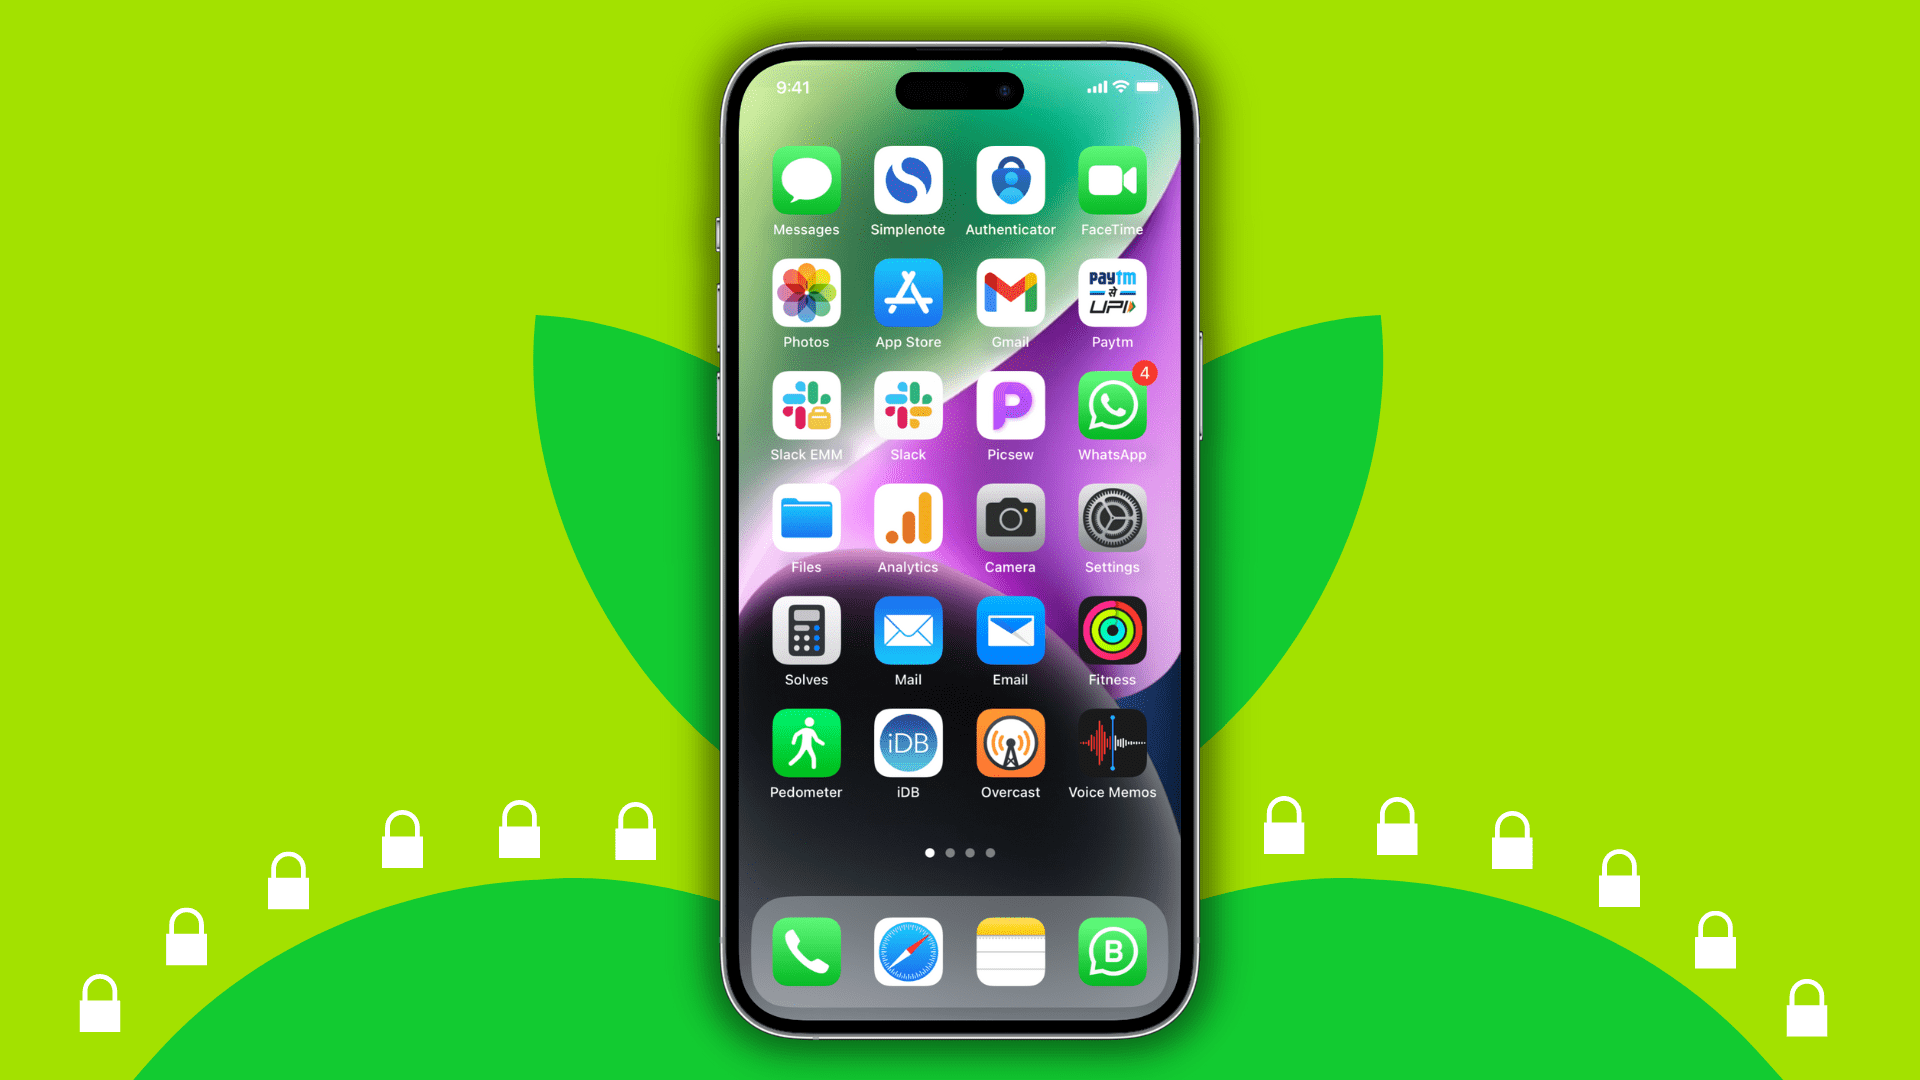 iPhone Home Screen showing its app and several tiny lock icons signifying privacy